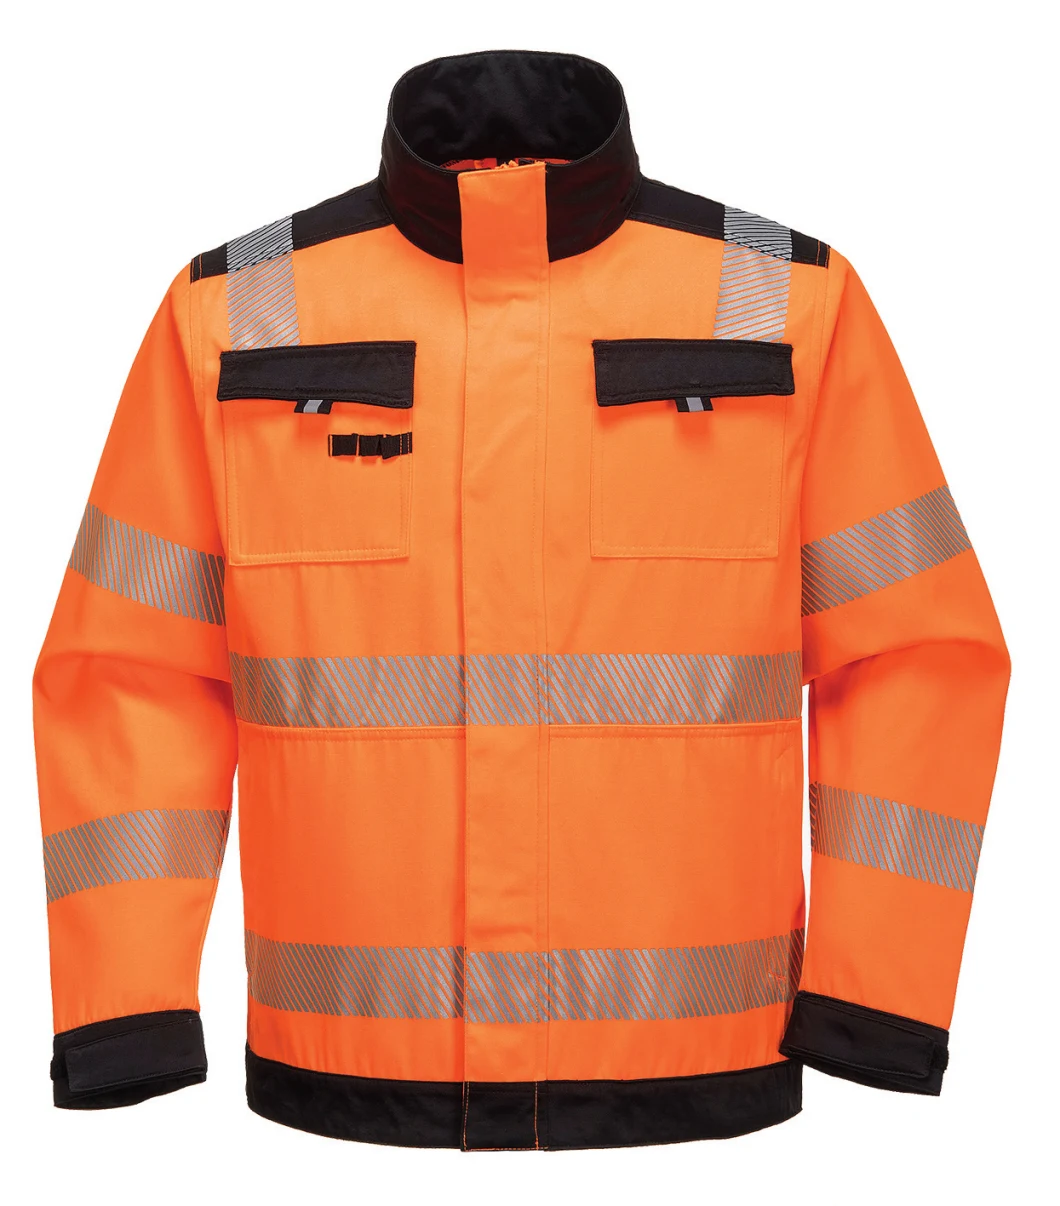 Hi-VI Safety Workwear Factory Produce 65% Polyester 35% Cotton Jacket for Work with Waterproof Upper Fabric